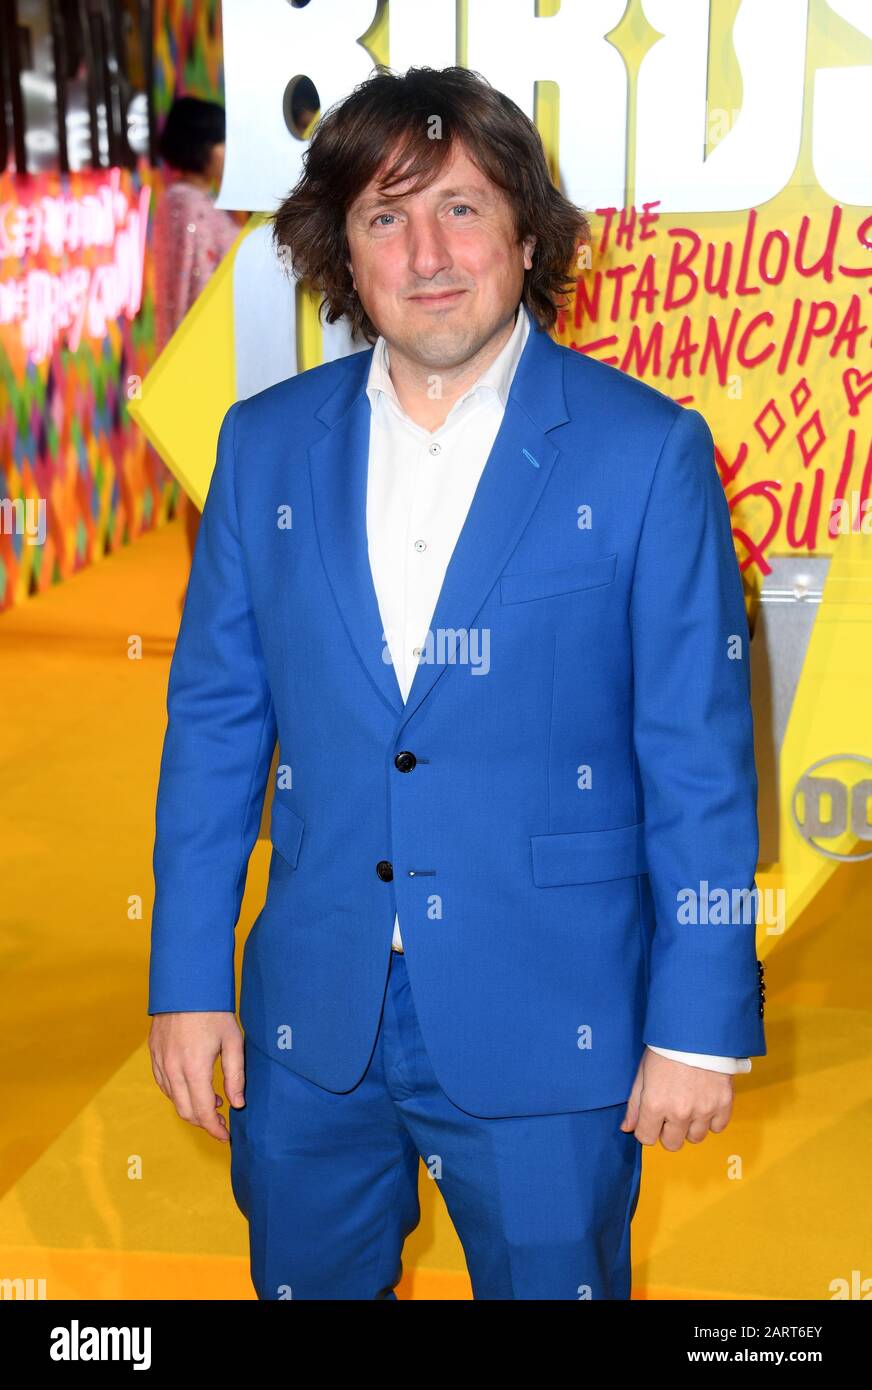 Daniel Pemberton attending the world premiere of Birds of Prey and the Fantabulous Emancipation of One Harley Quinn, held at the BFI IMAX, London. Stock Photo